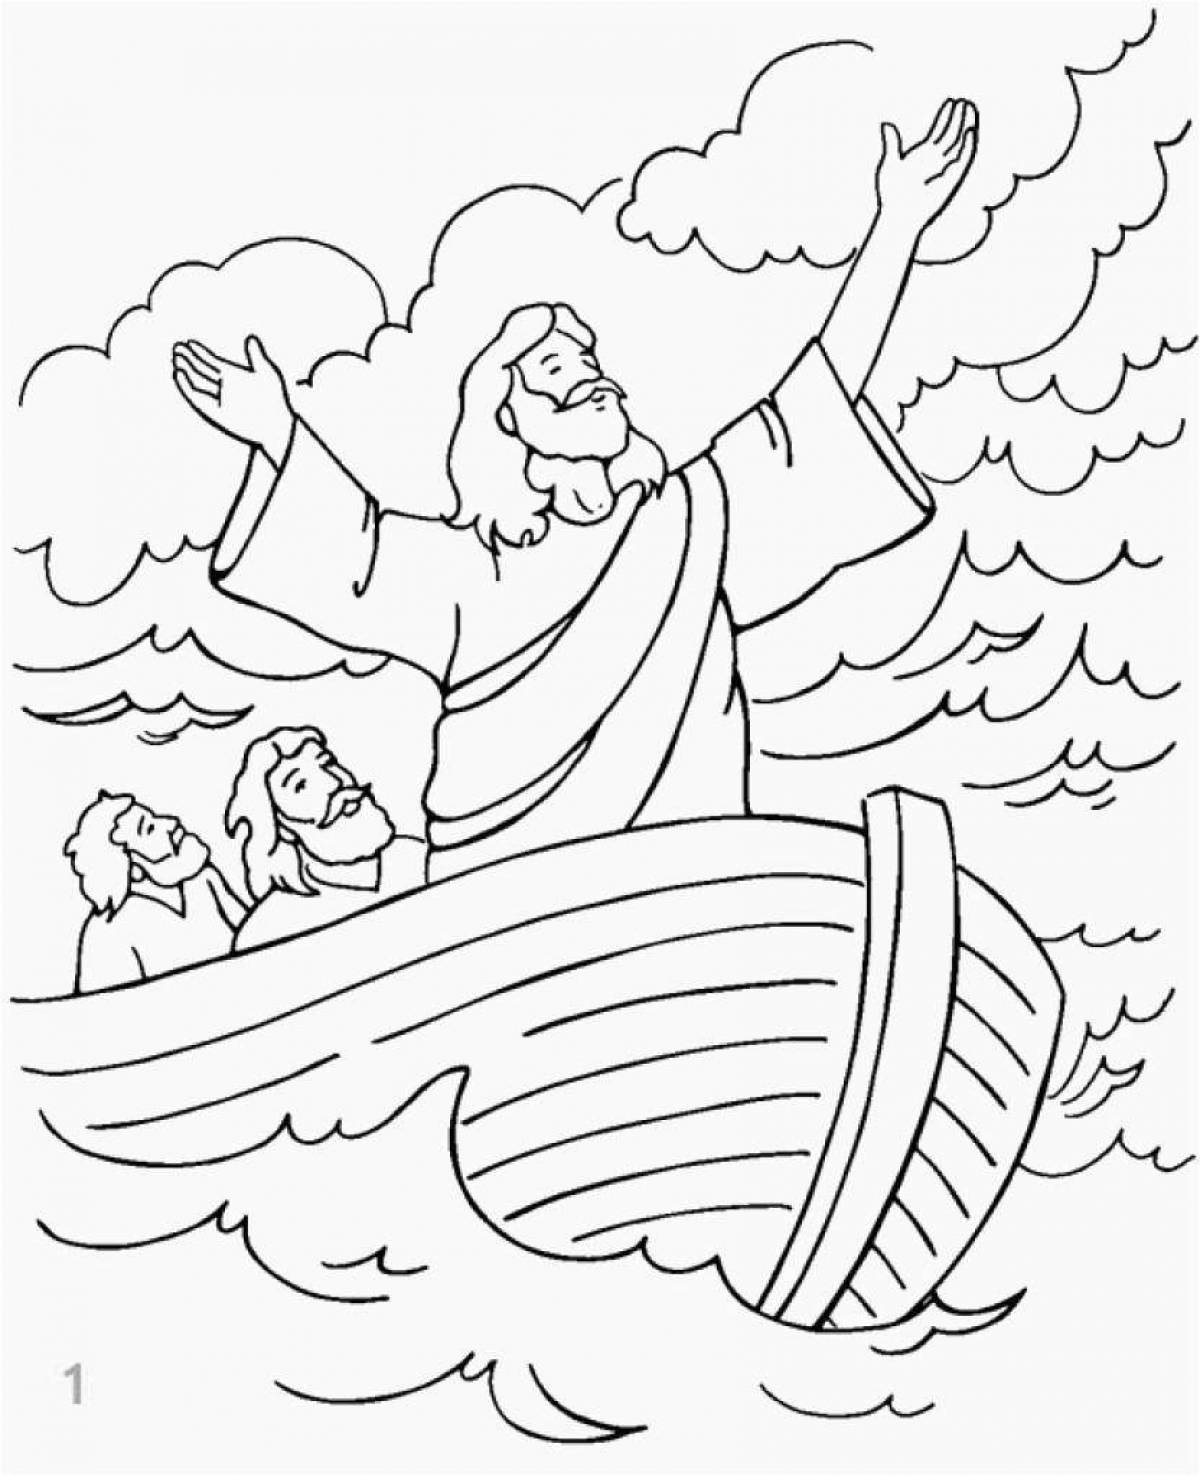 Children's bible coloring book